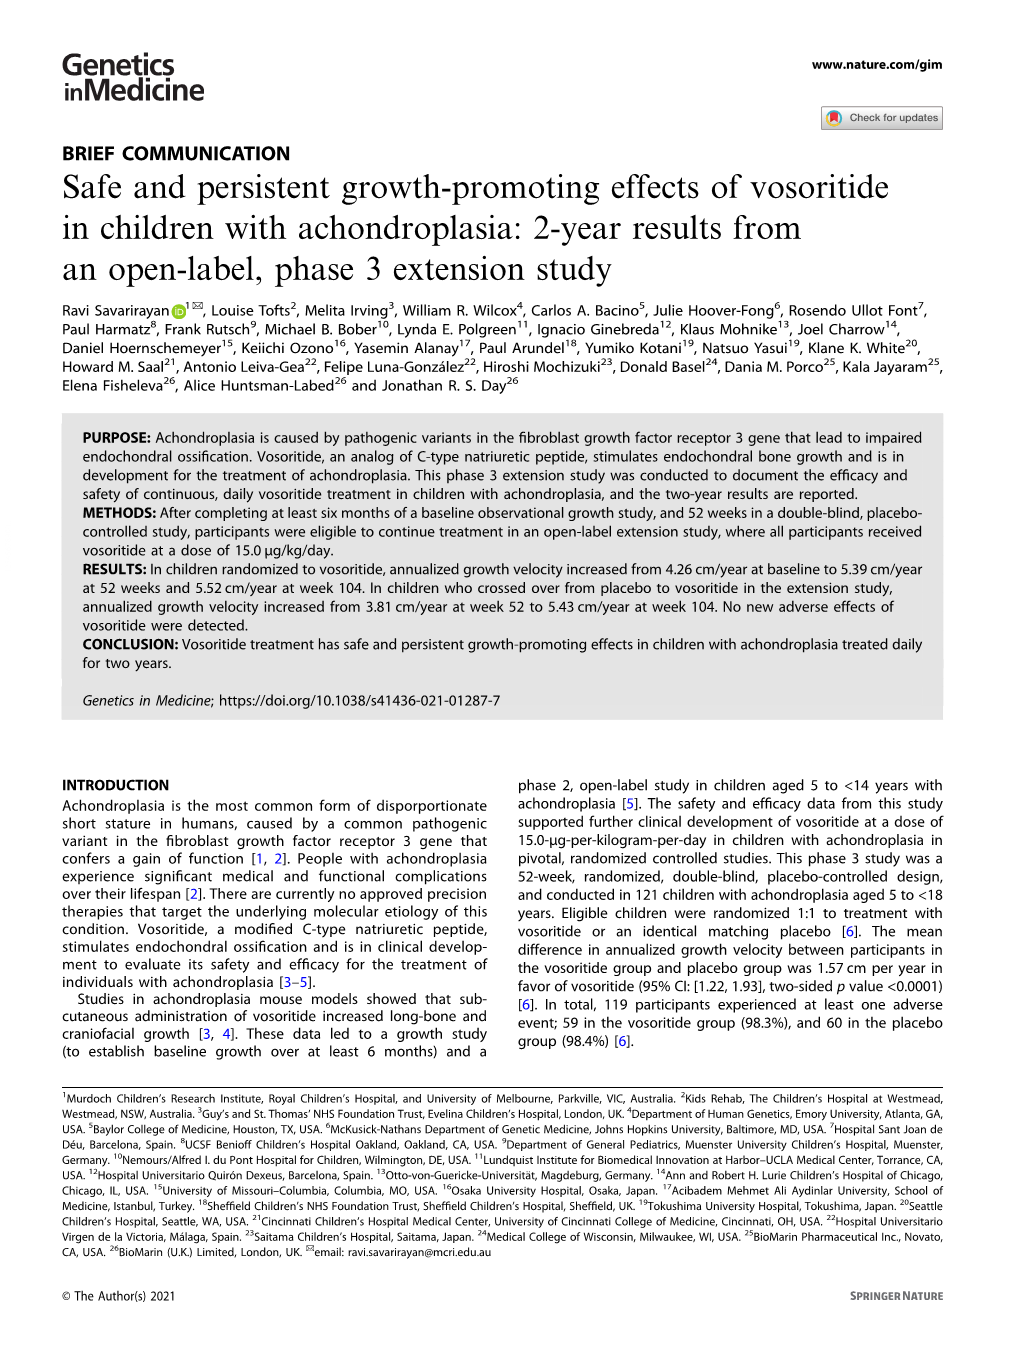 Safe and Persistent Growth-Promoting Effects of Vosoritide In